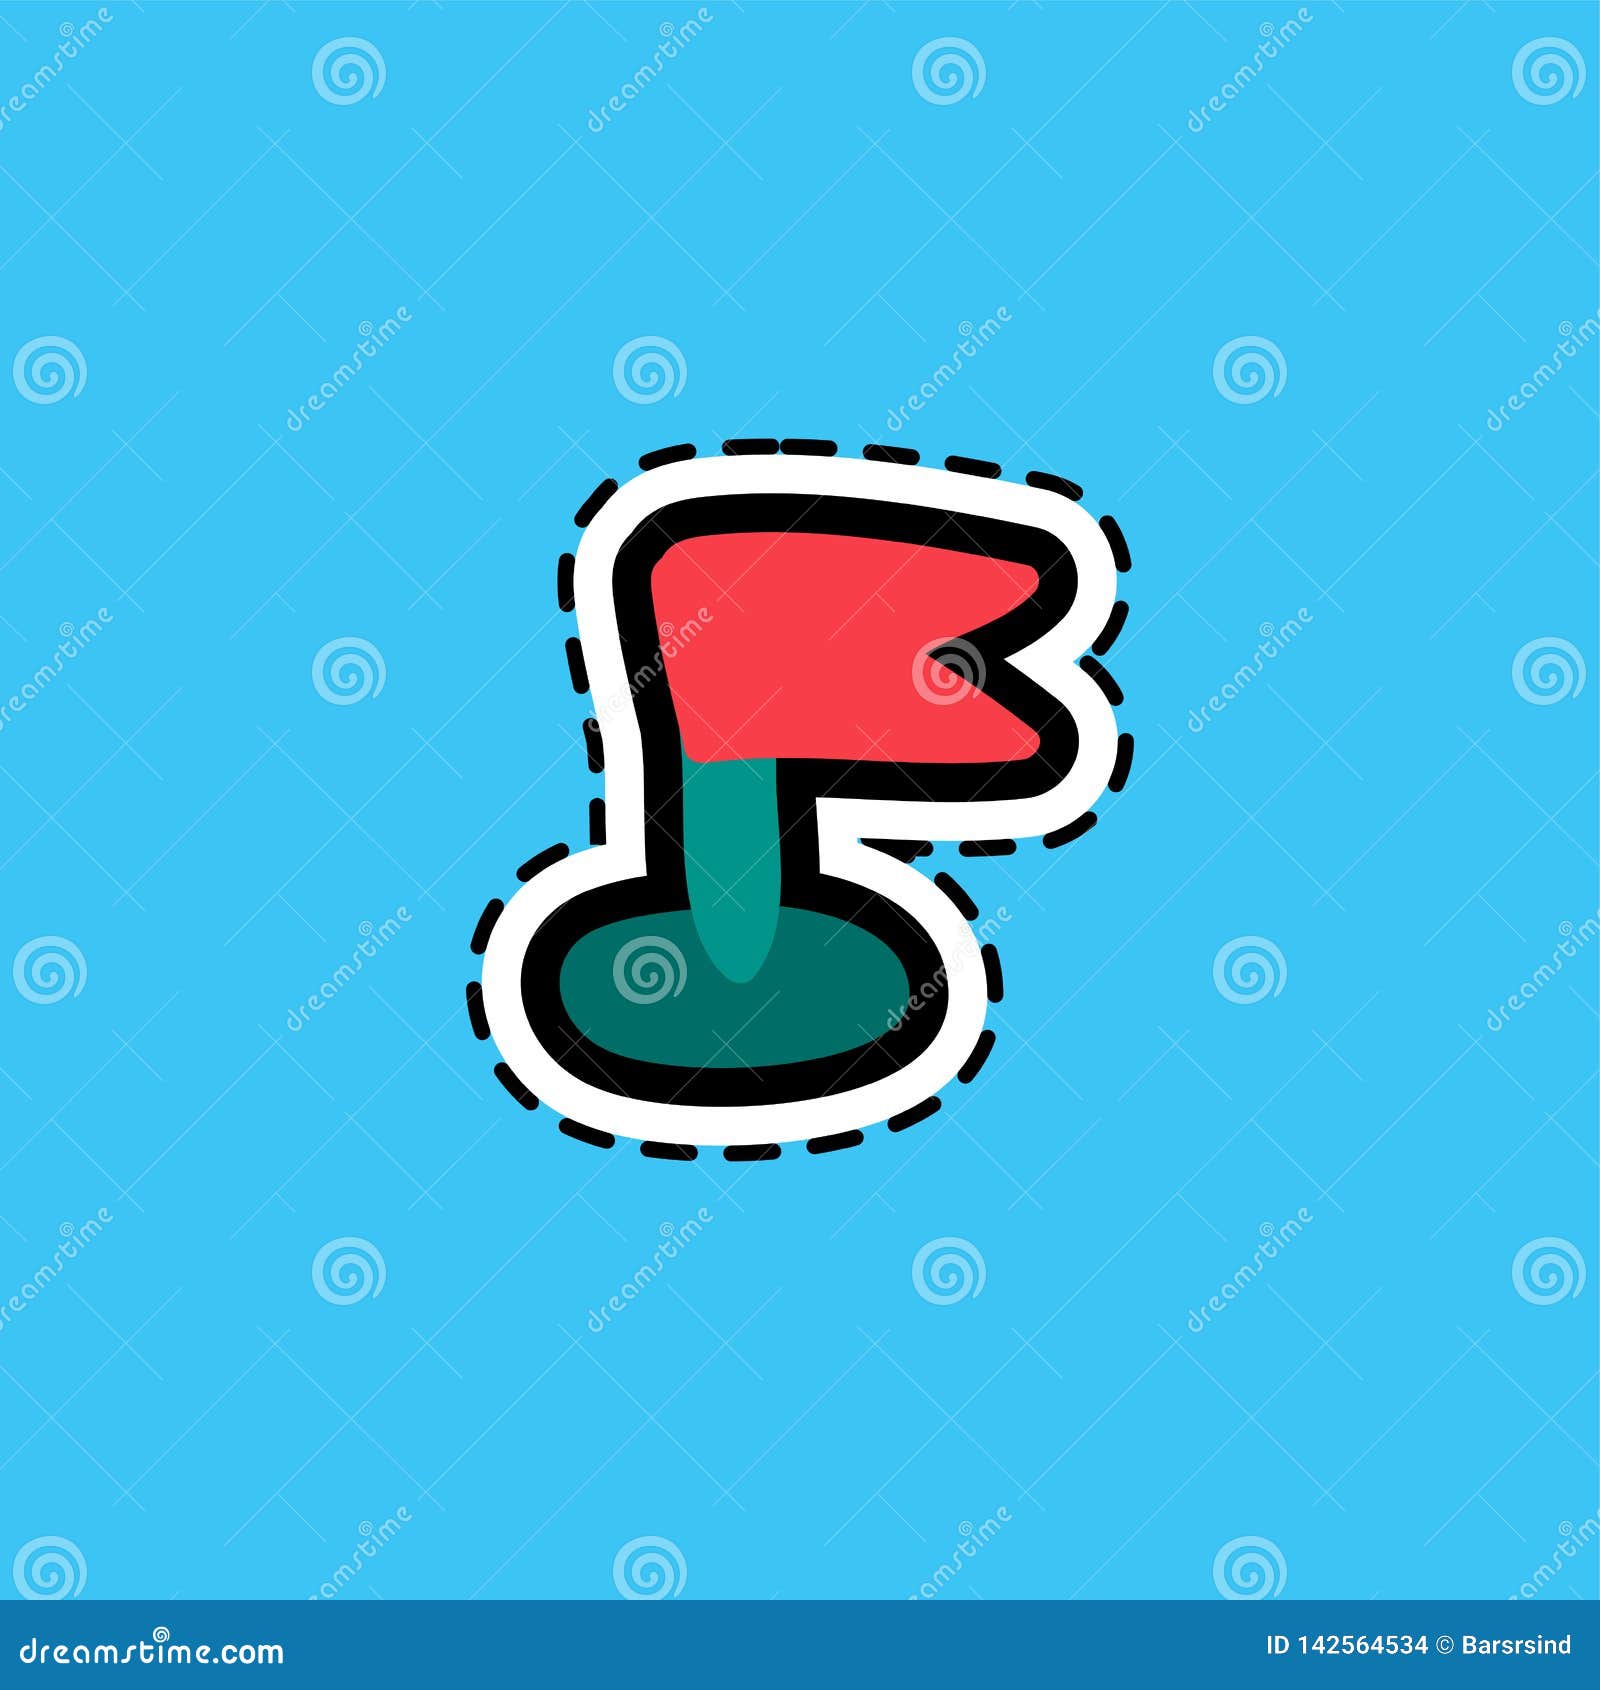 Download Flag Flat Color Sticker With Stitch Contour Stock Vector ...